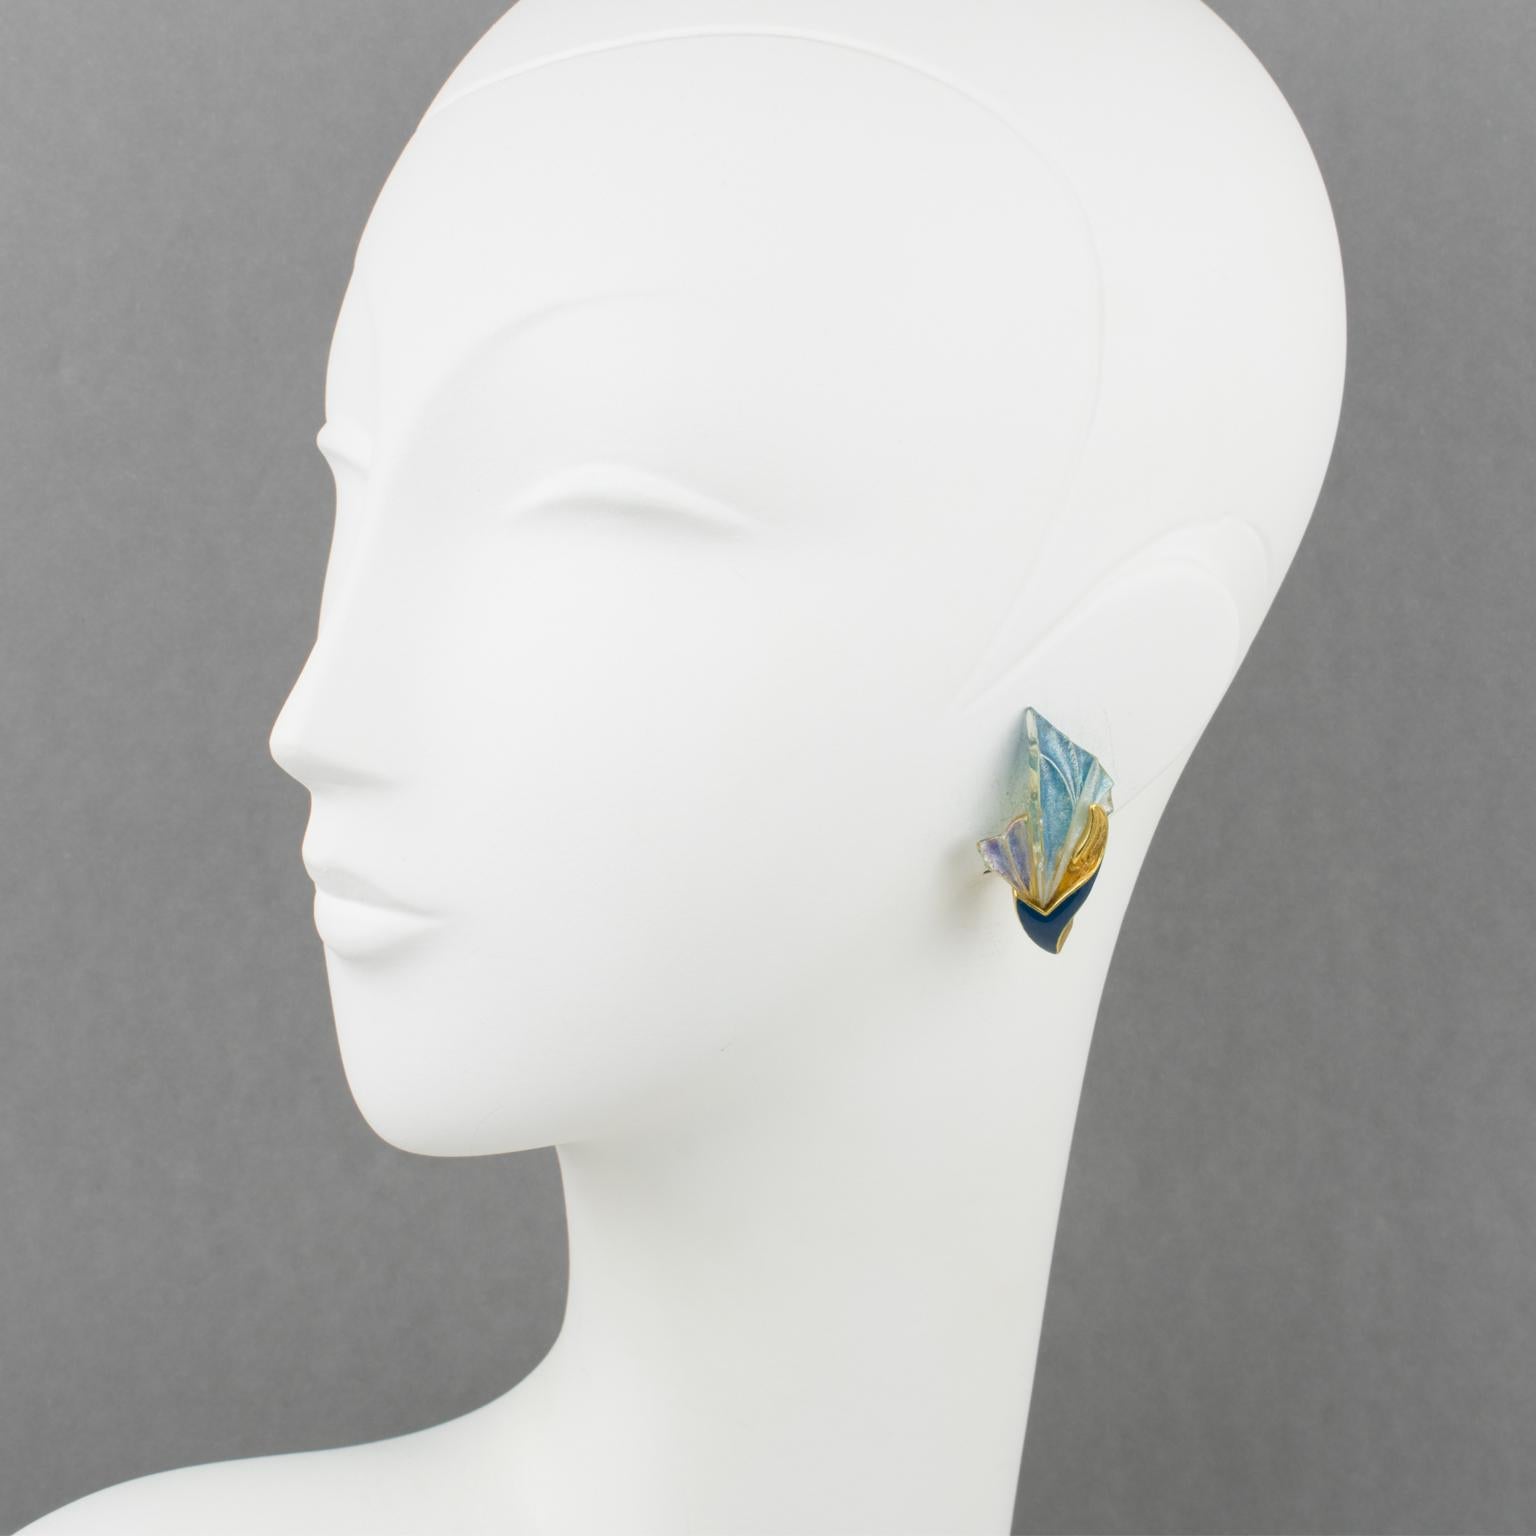 These elegant Emanuel Ungaro Paris clip-on earrings feature a gilt metal floral shape in an Art-Nouveau-inspired design. The metal framing is topped with cobalt blue enamel and complimented with an iridescent resin fan shape. The resin fan displays